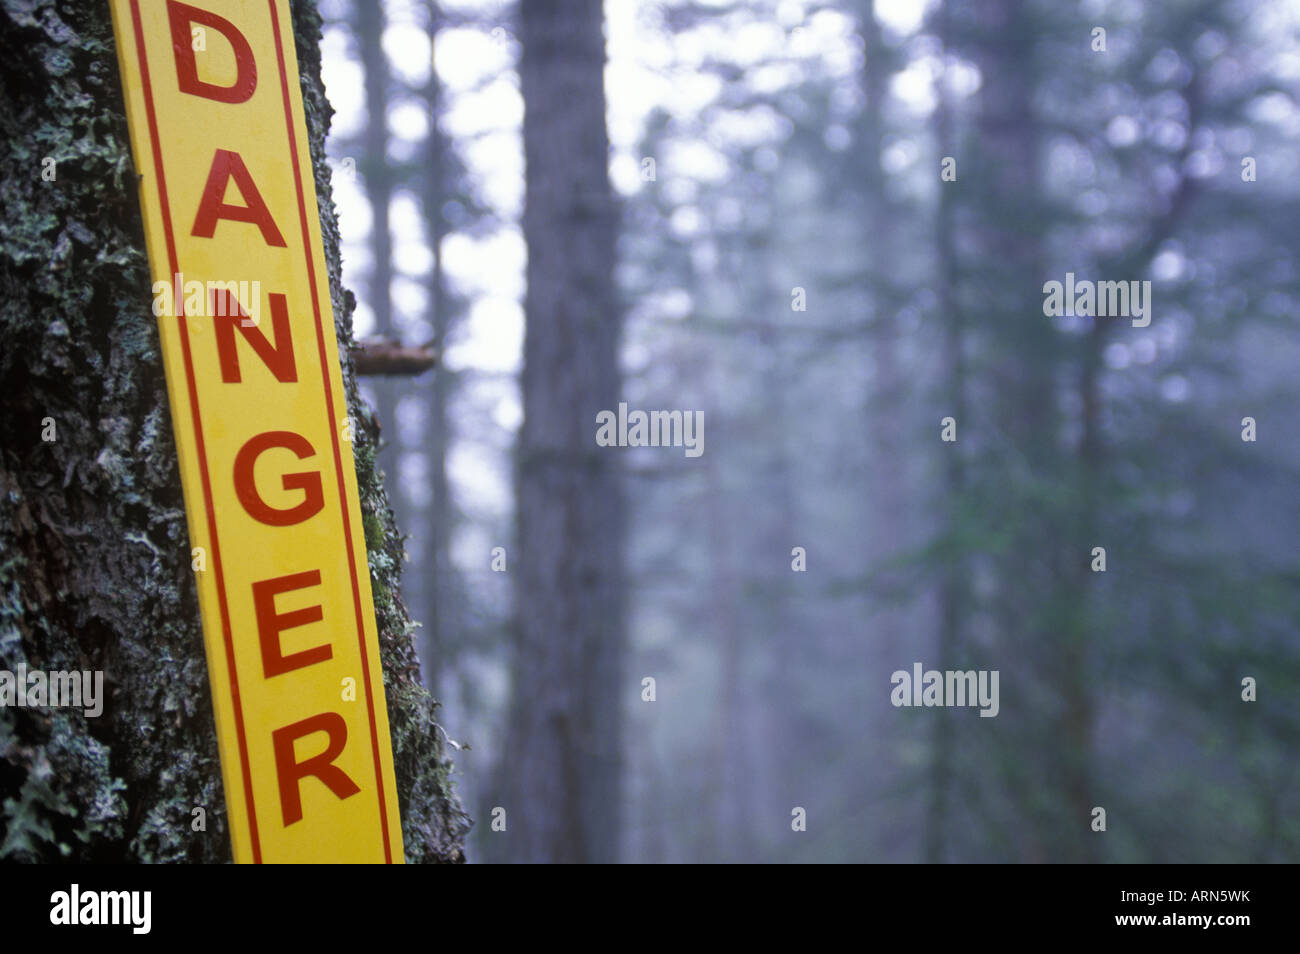 Danger sign in the woods, British Columbia, Canada. Stock Photo